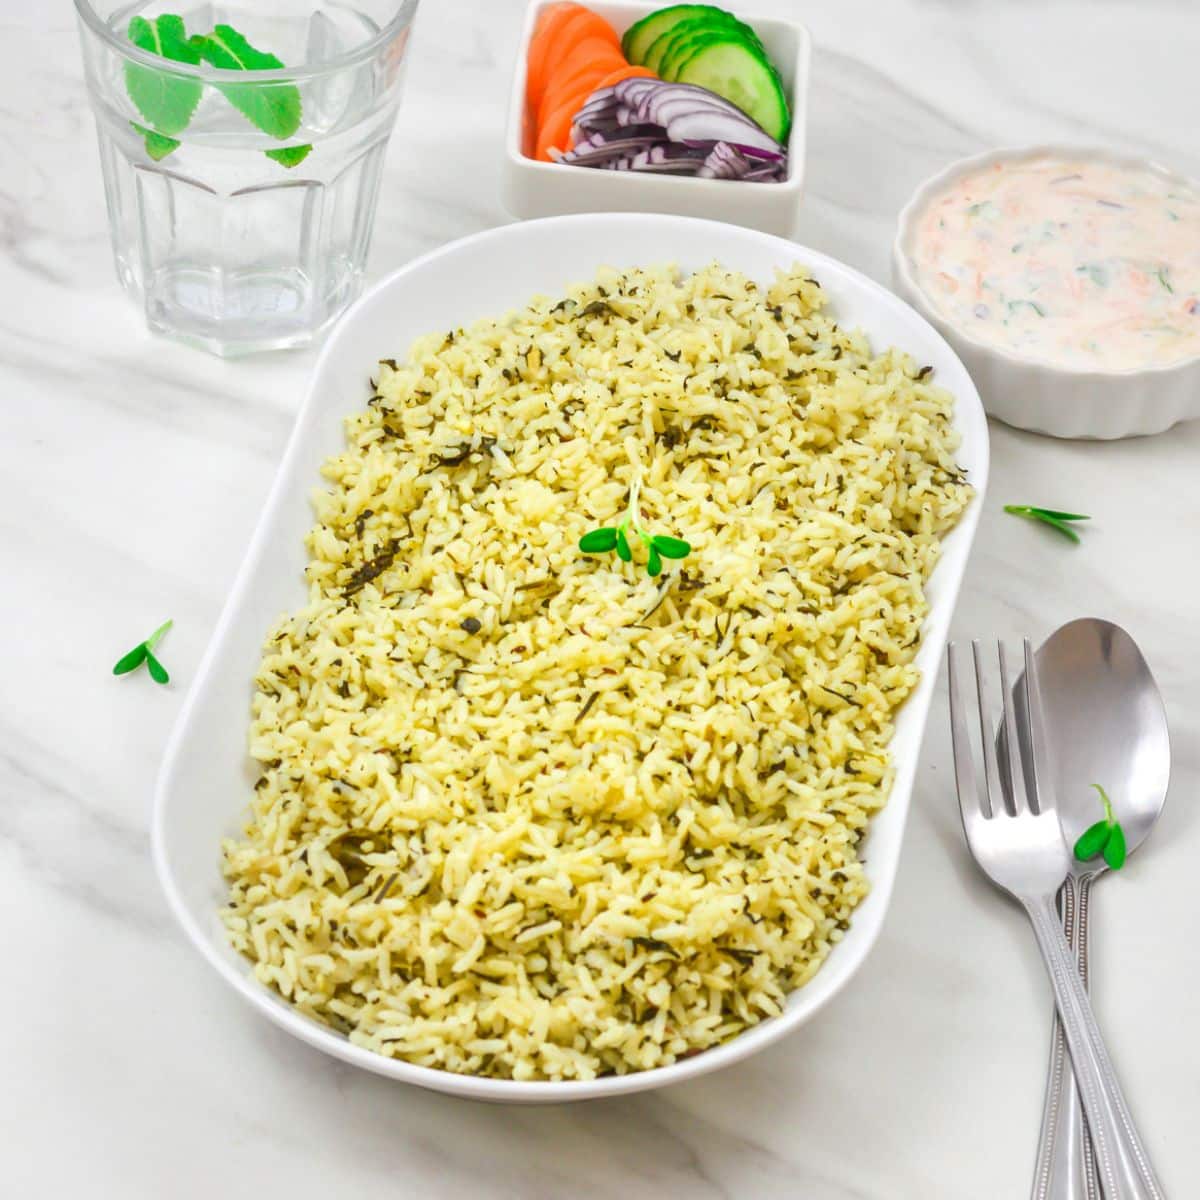 Methi Pulao in a white bowl on a marble background with cutlery, bowl of raita, salad and glass of water.